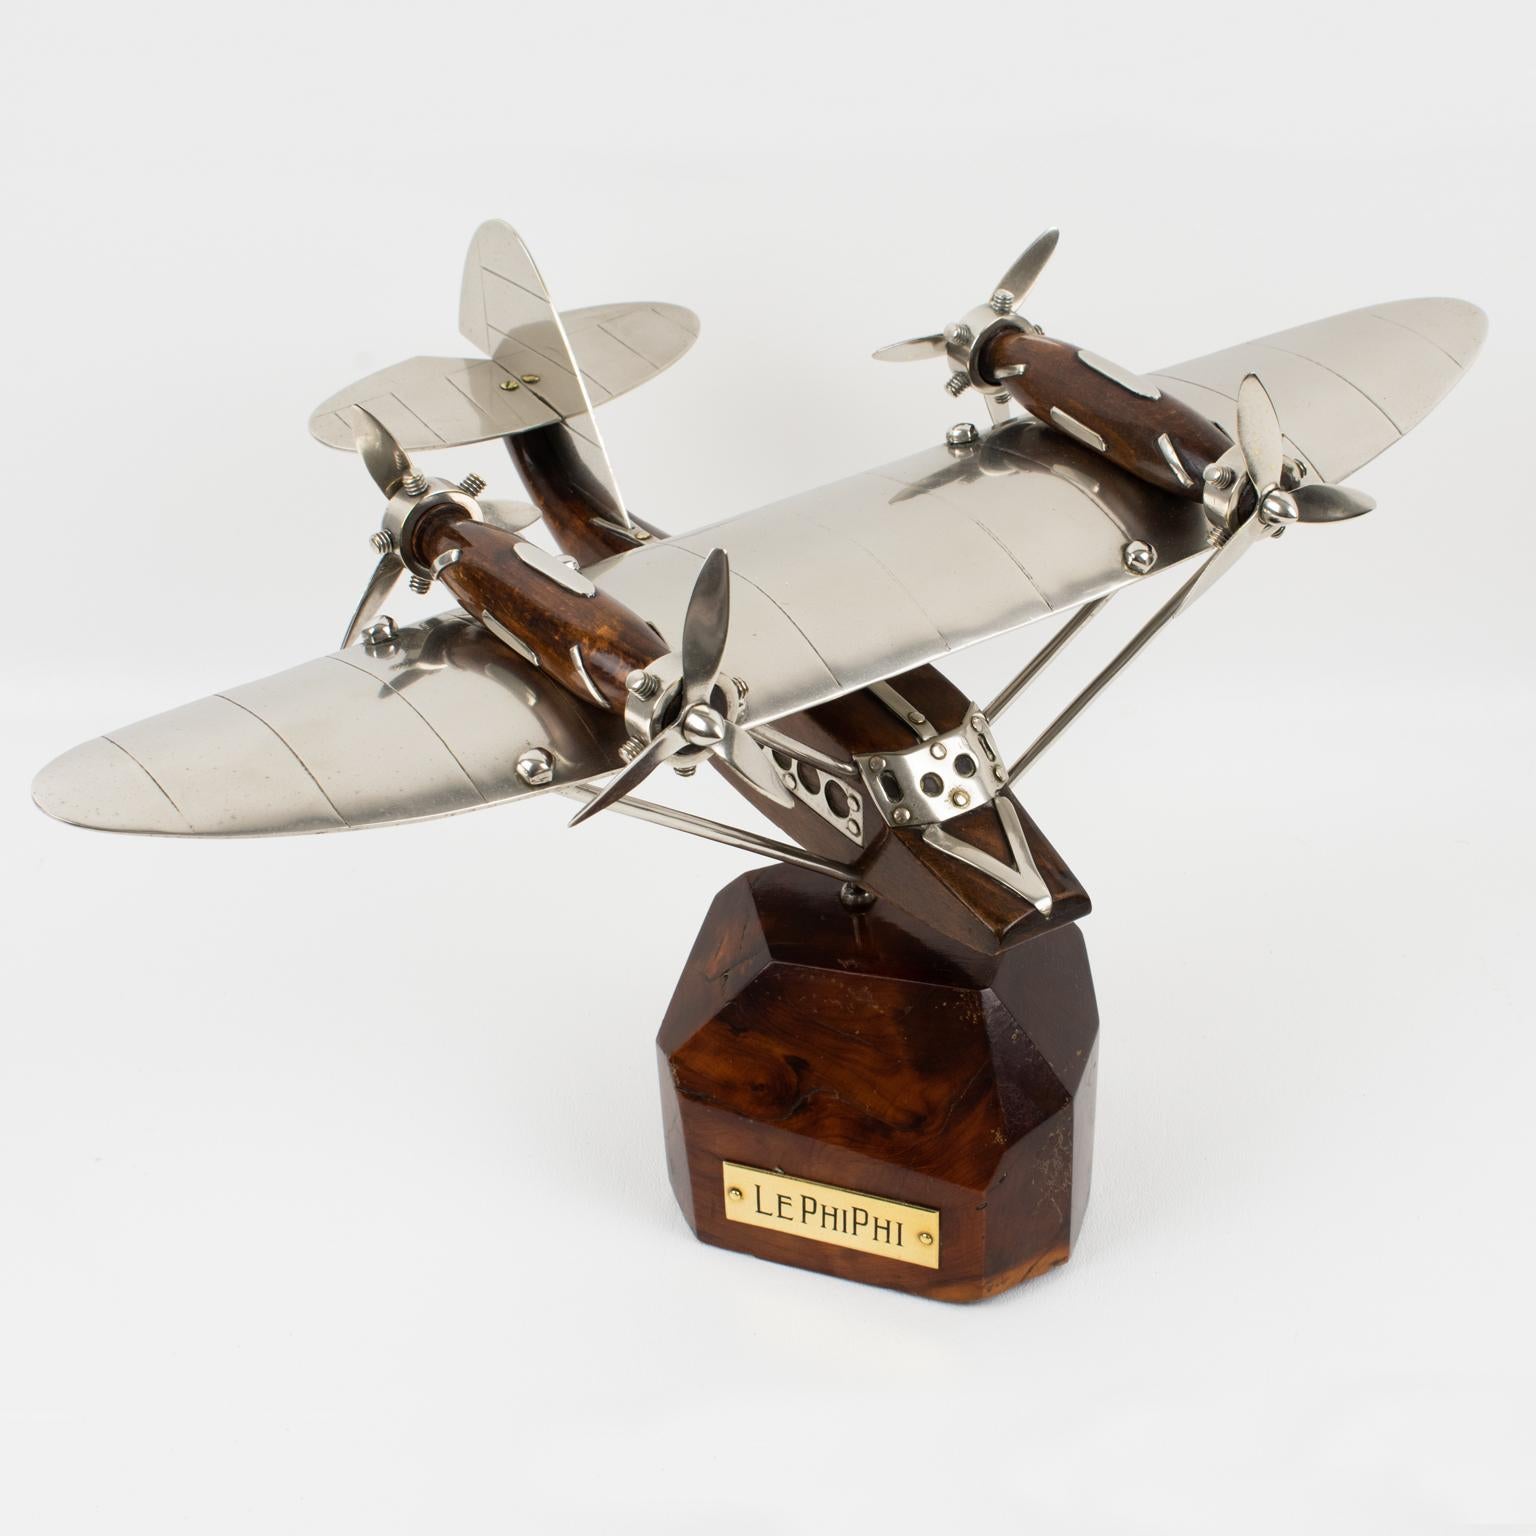 Art Deco Wood and Chrome Airplane SeaPlane Aviation Model, France 1940s For Sale 3